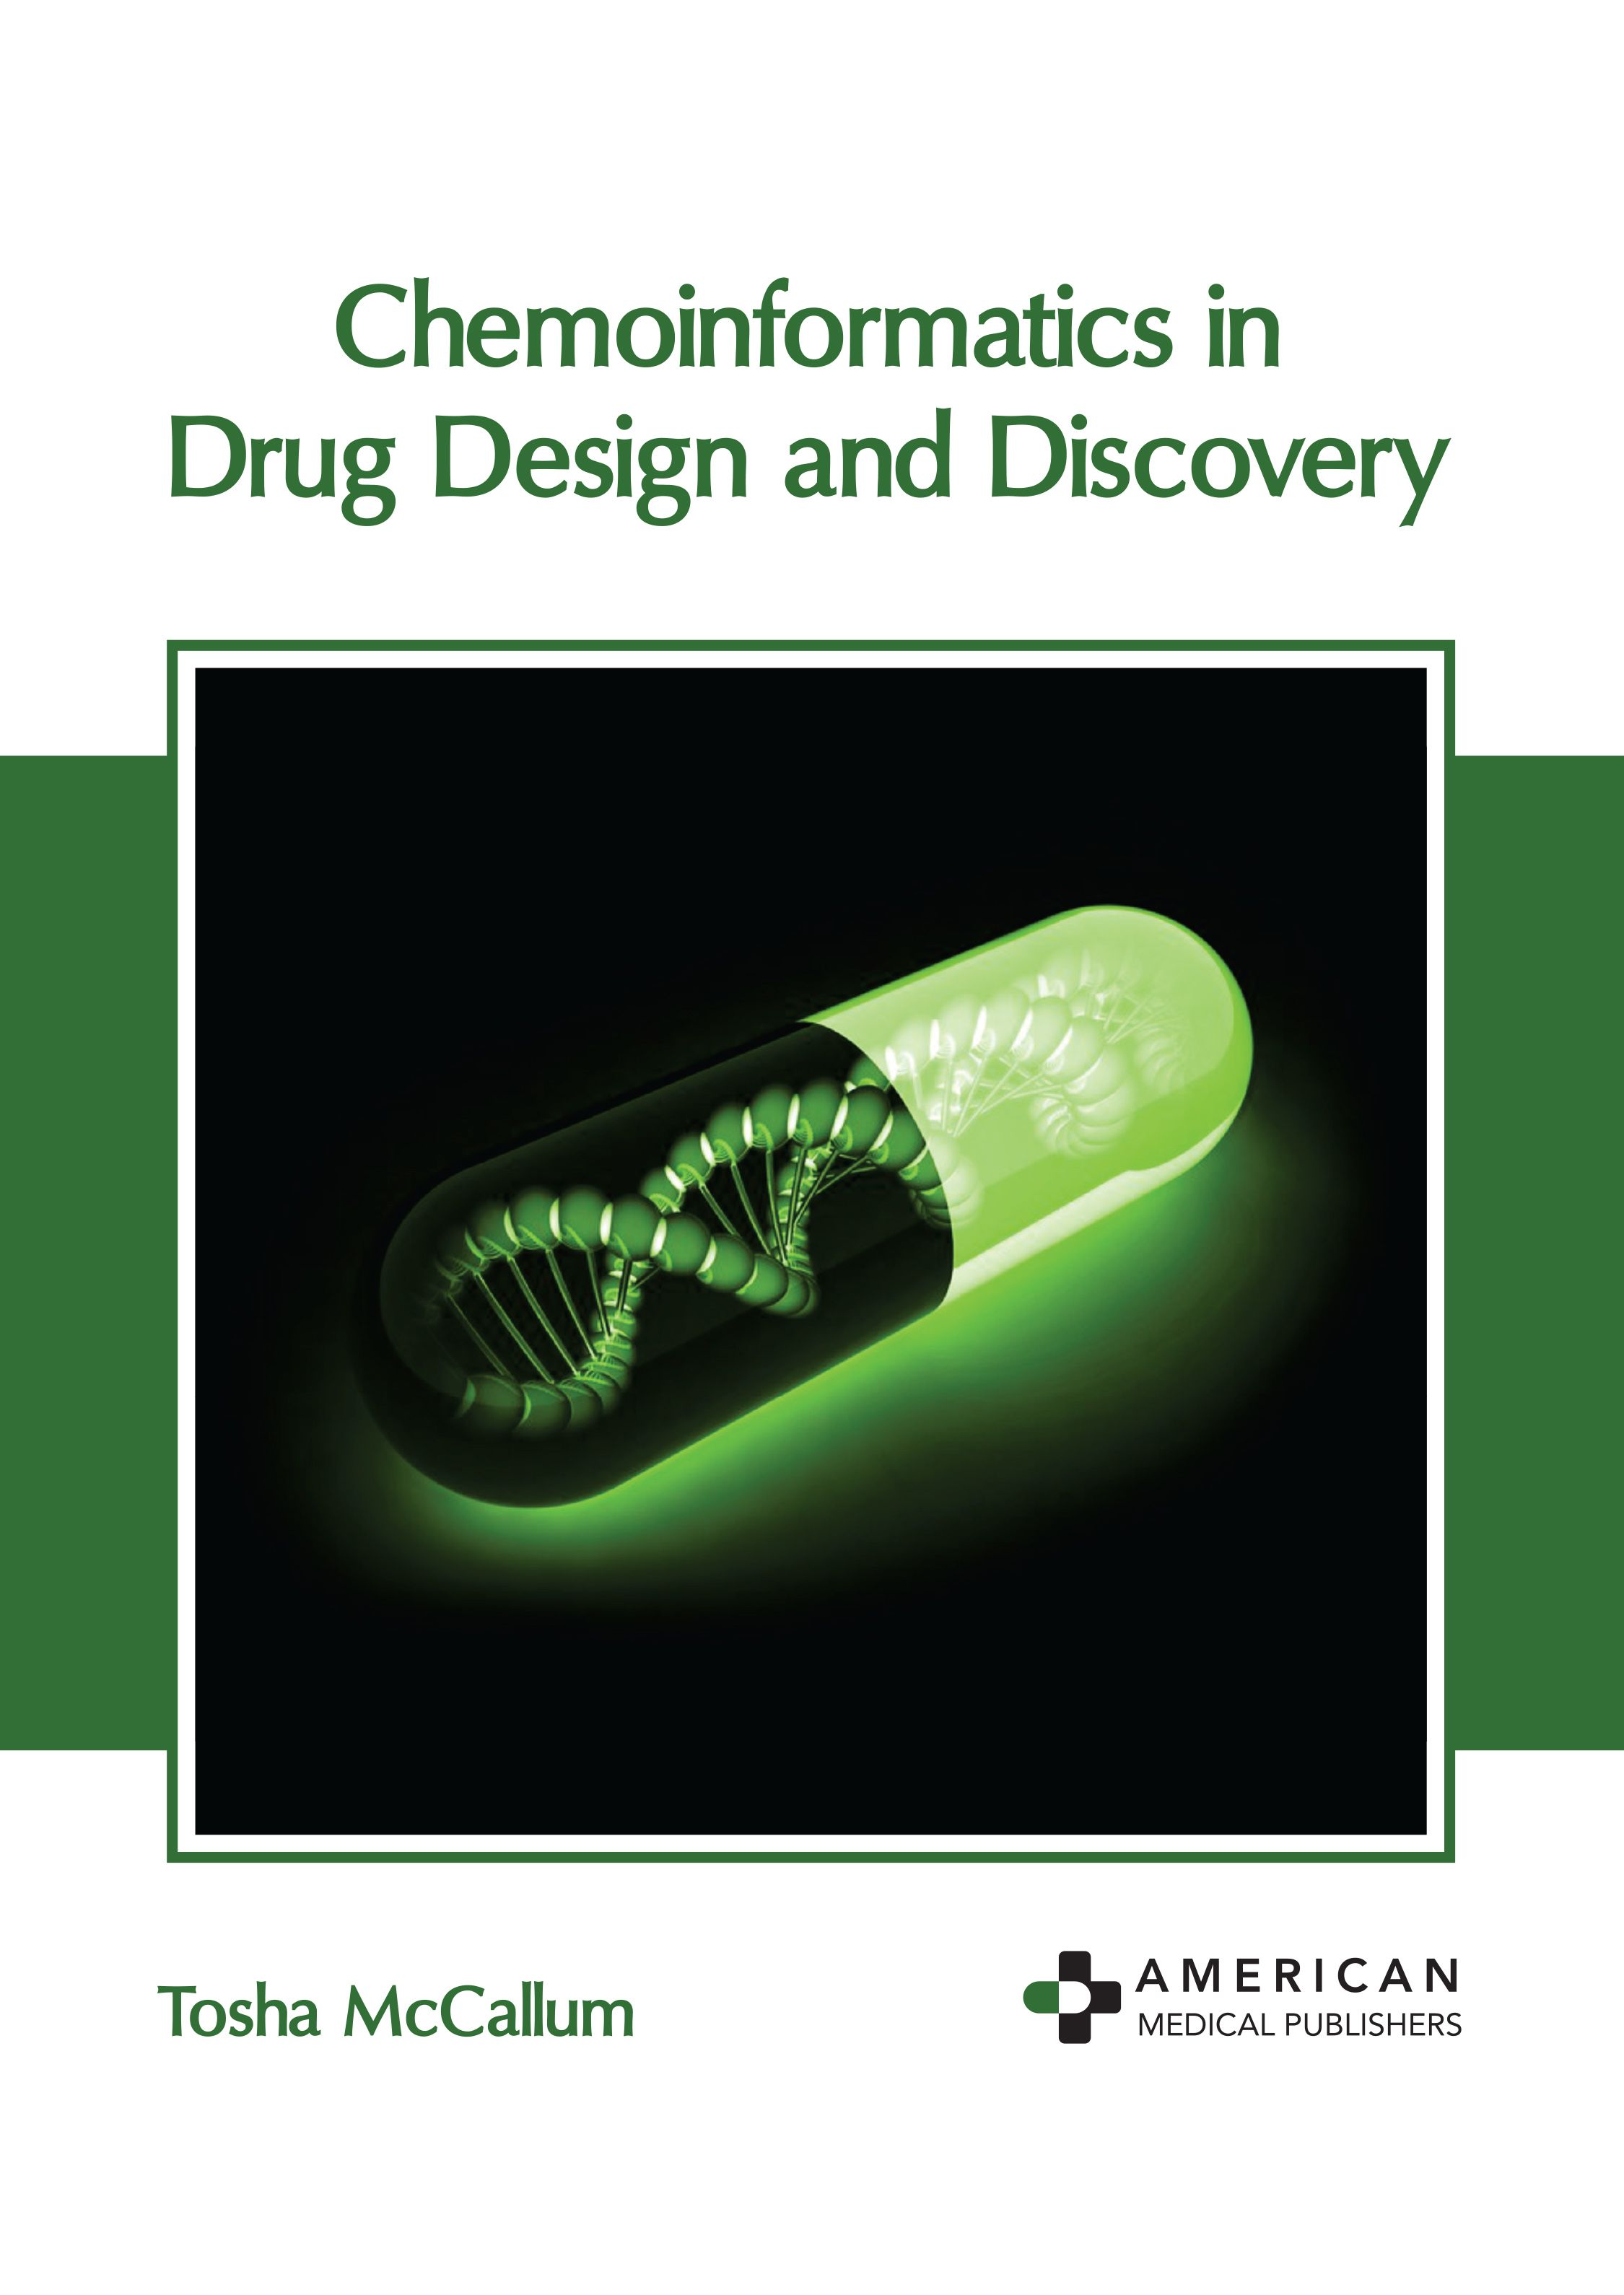 

exclusive-publishers/american-medical-publishers/chemoinformatics-in-drug-design-and-discovery-9781639279760